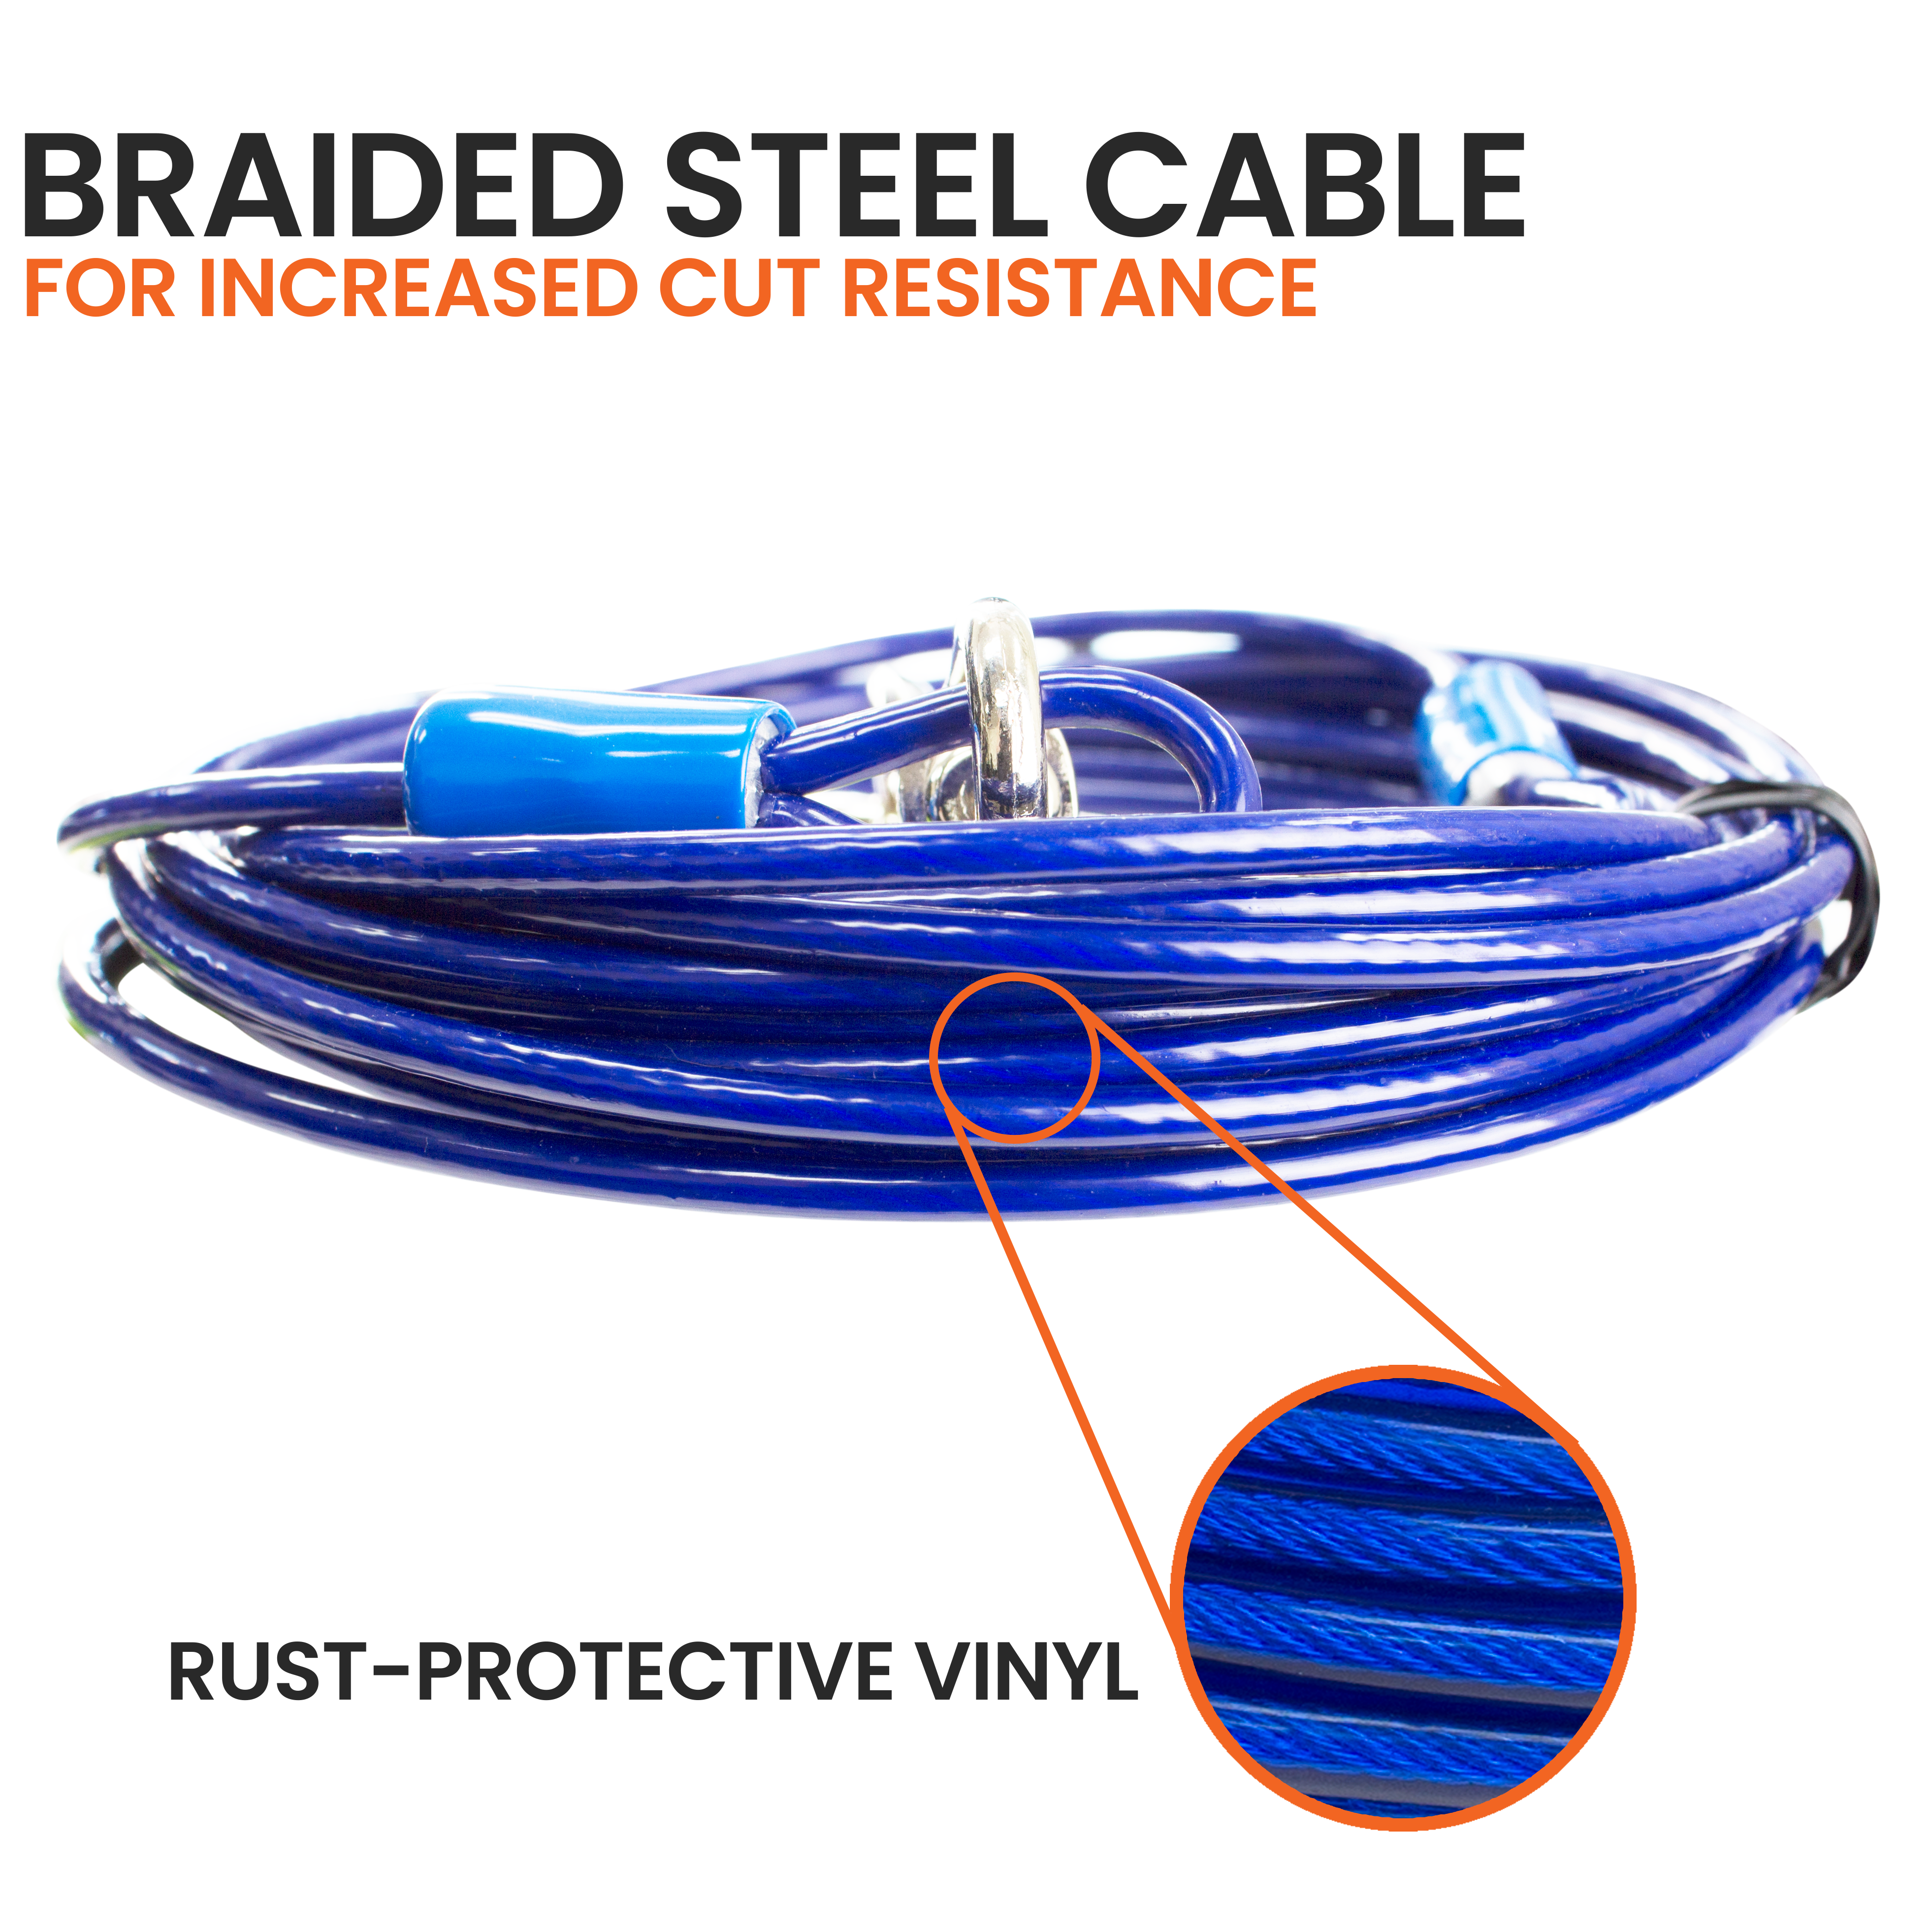 Braided Steel Cable for Added Cut Resistance